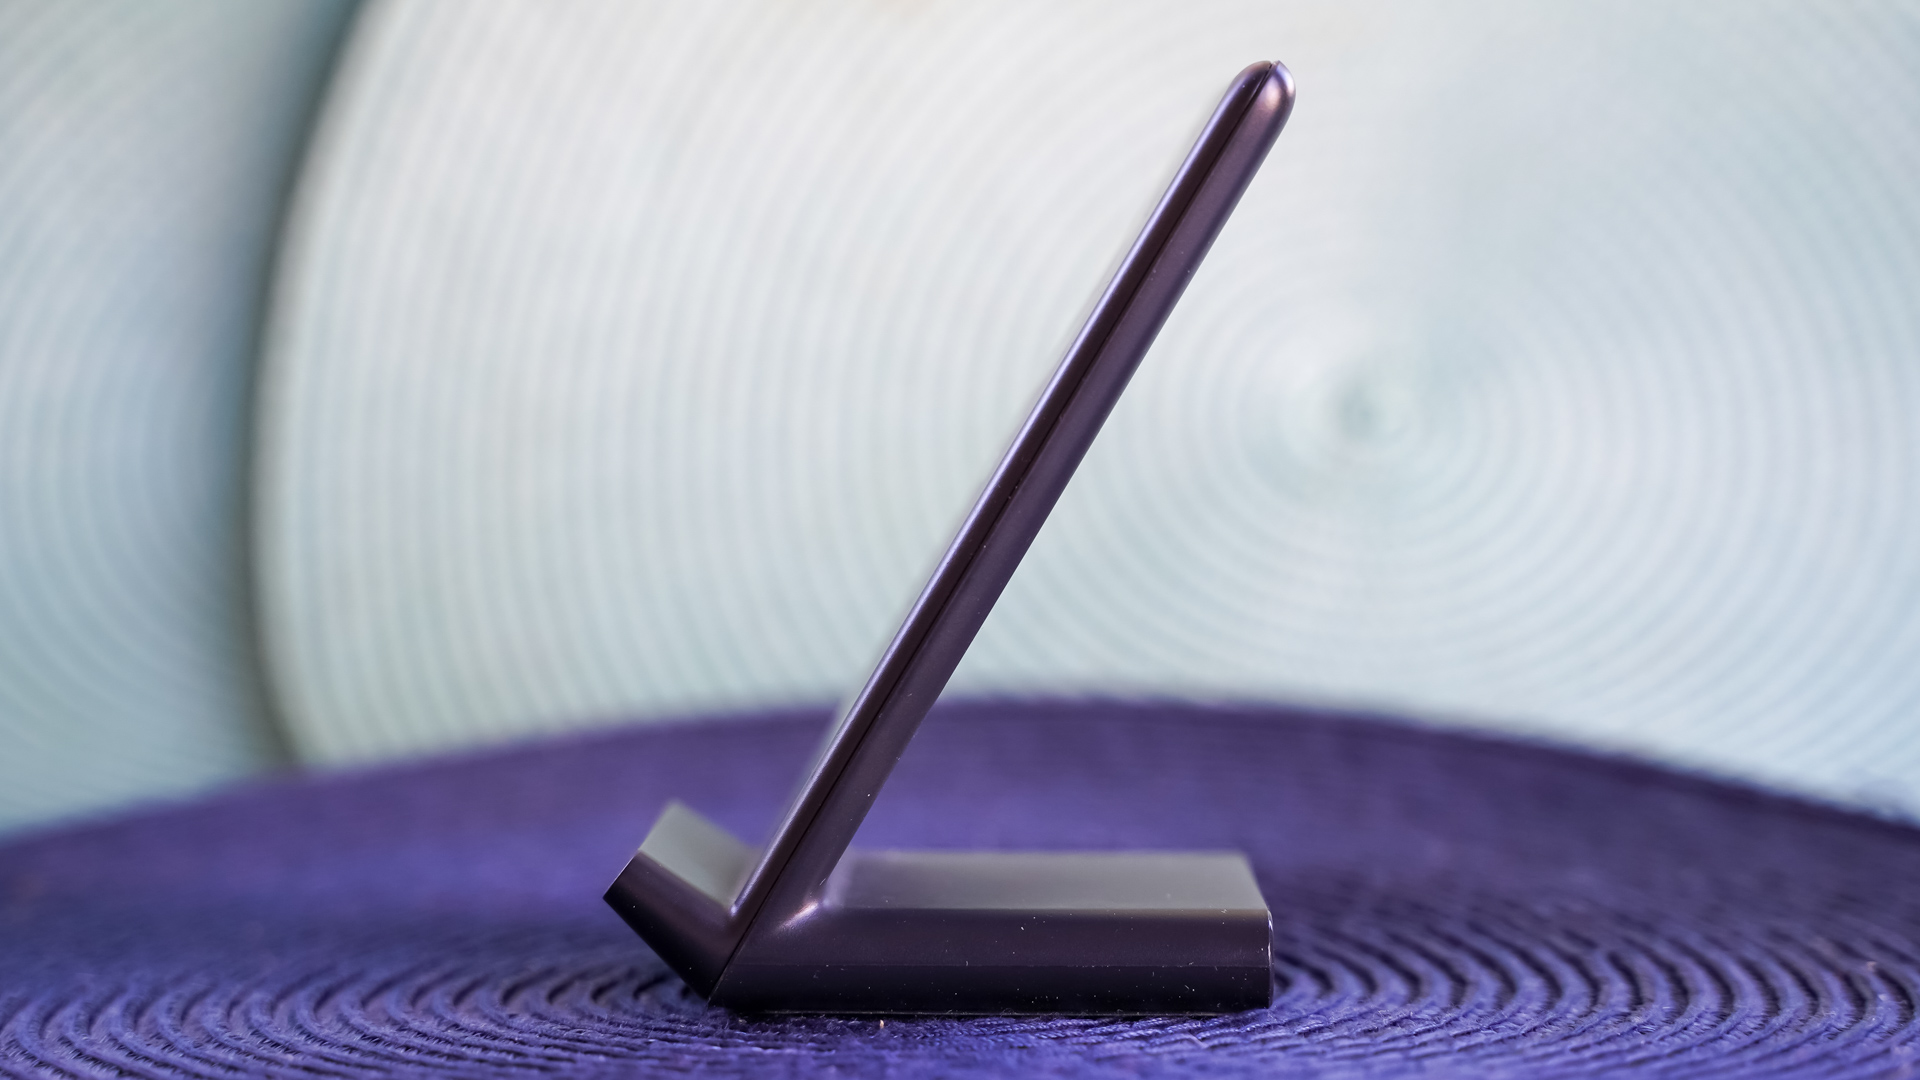 Anker PowerWave Stand side profile